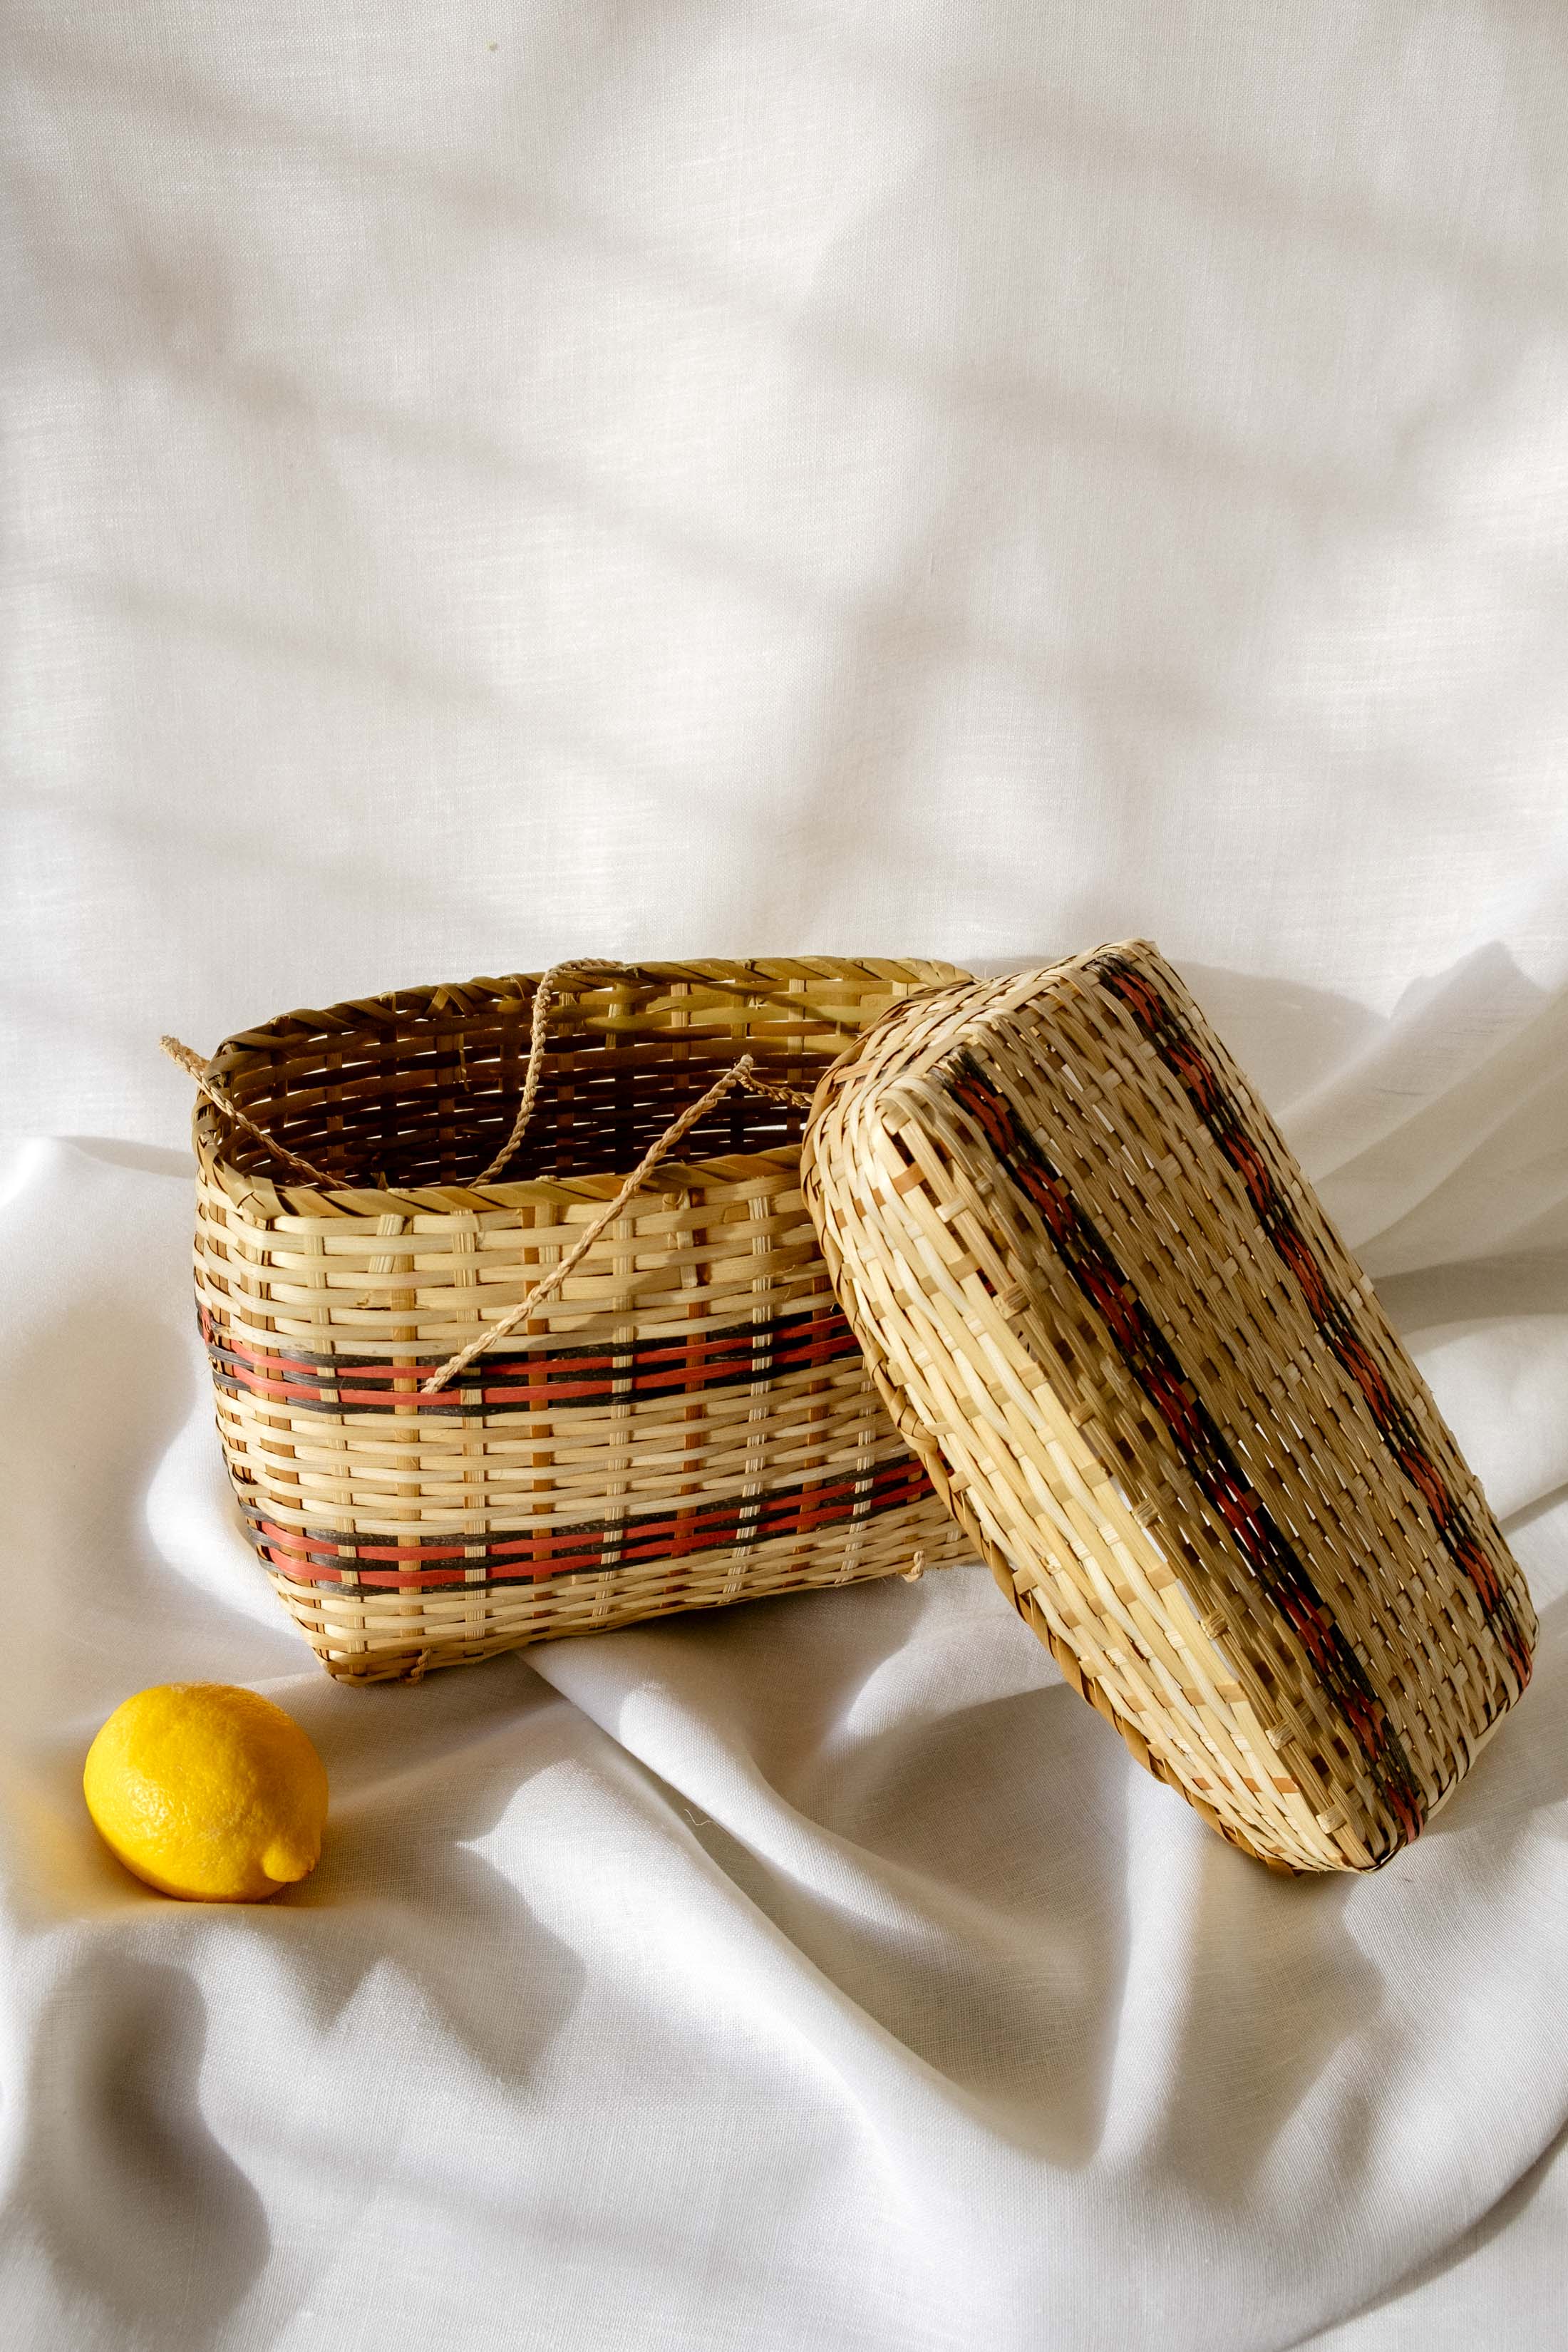 Basket bag with lid from El Valle de Antón's Sunday market in Panama